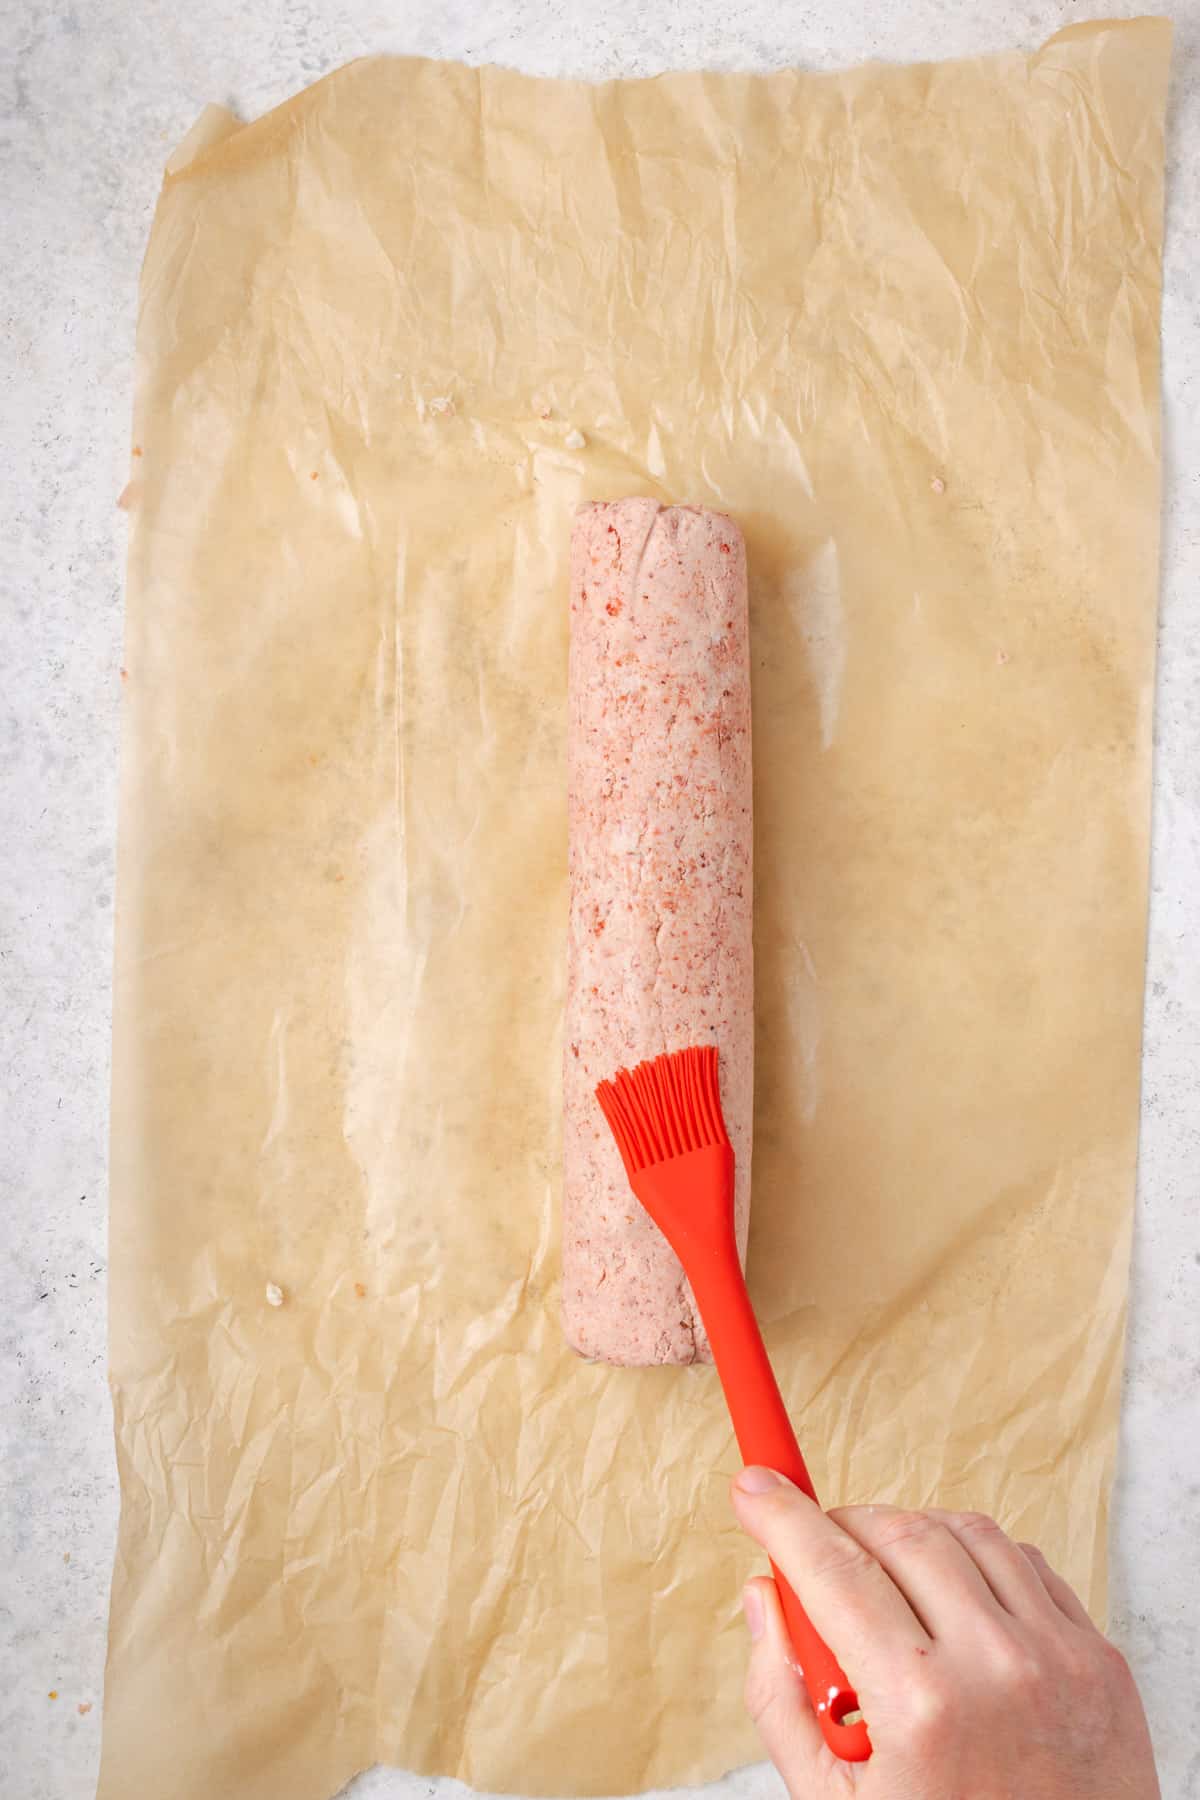 Log of strawberry cheesecake dough being brushed with water on a pastry brush.